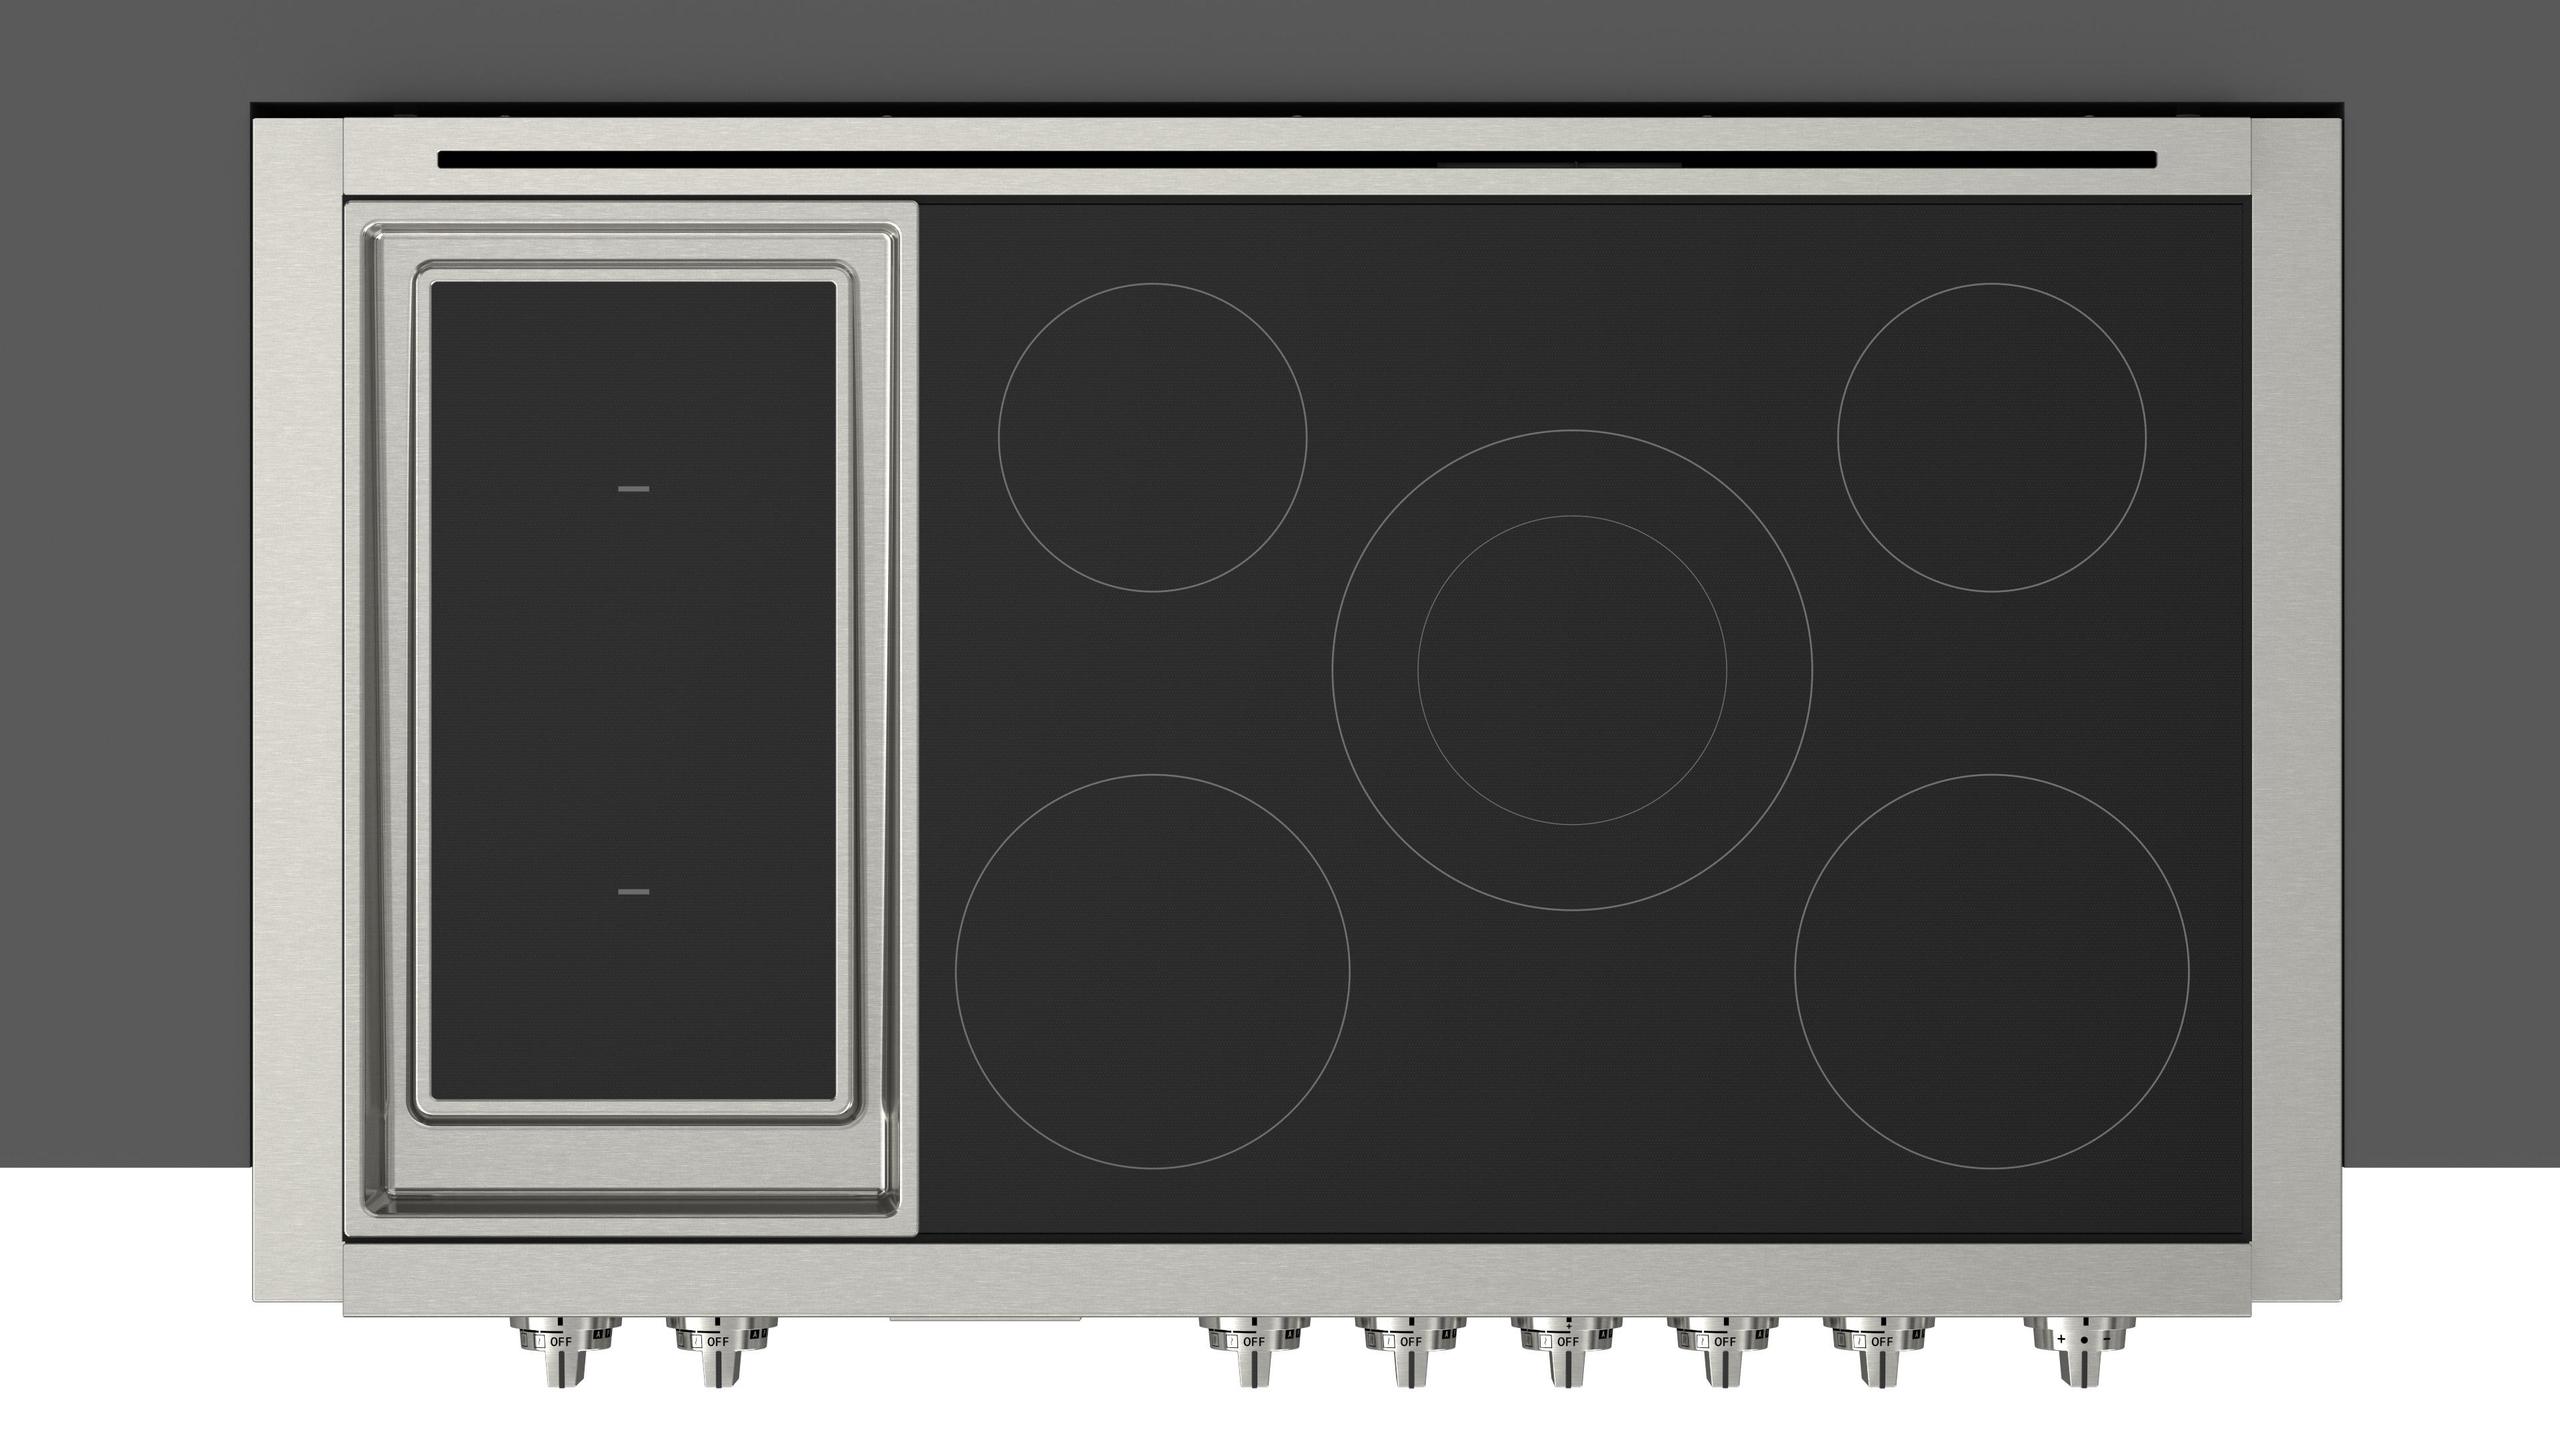 SOFIA 48" PRO INDUCTION RANGETOP WITH GRIDDLE